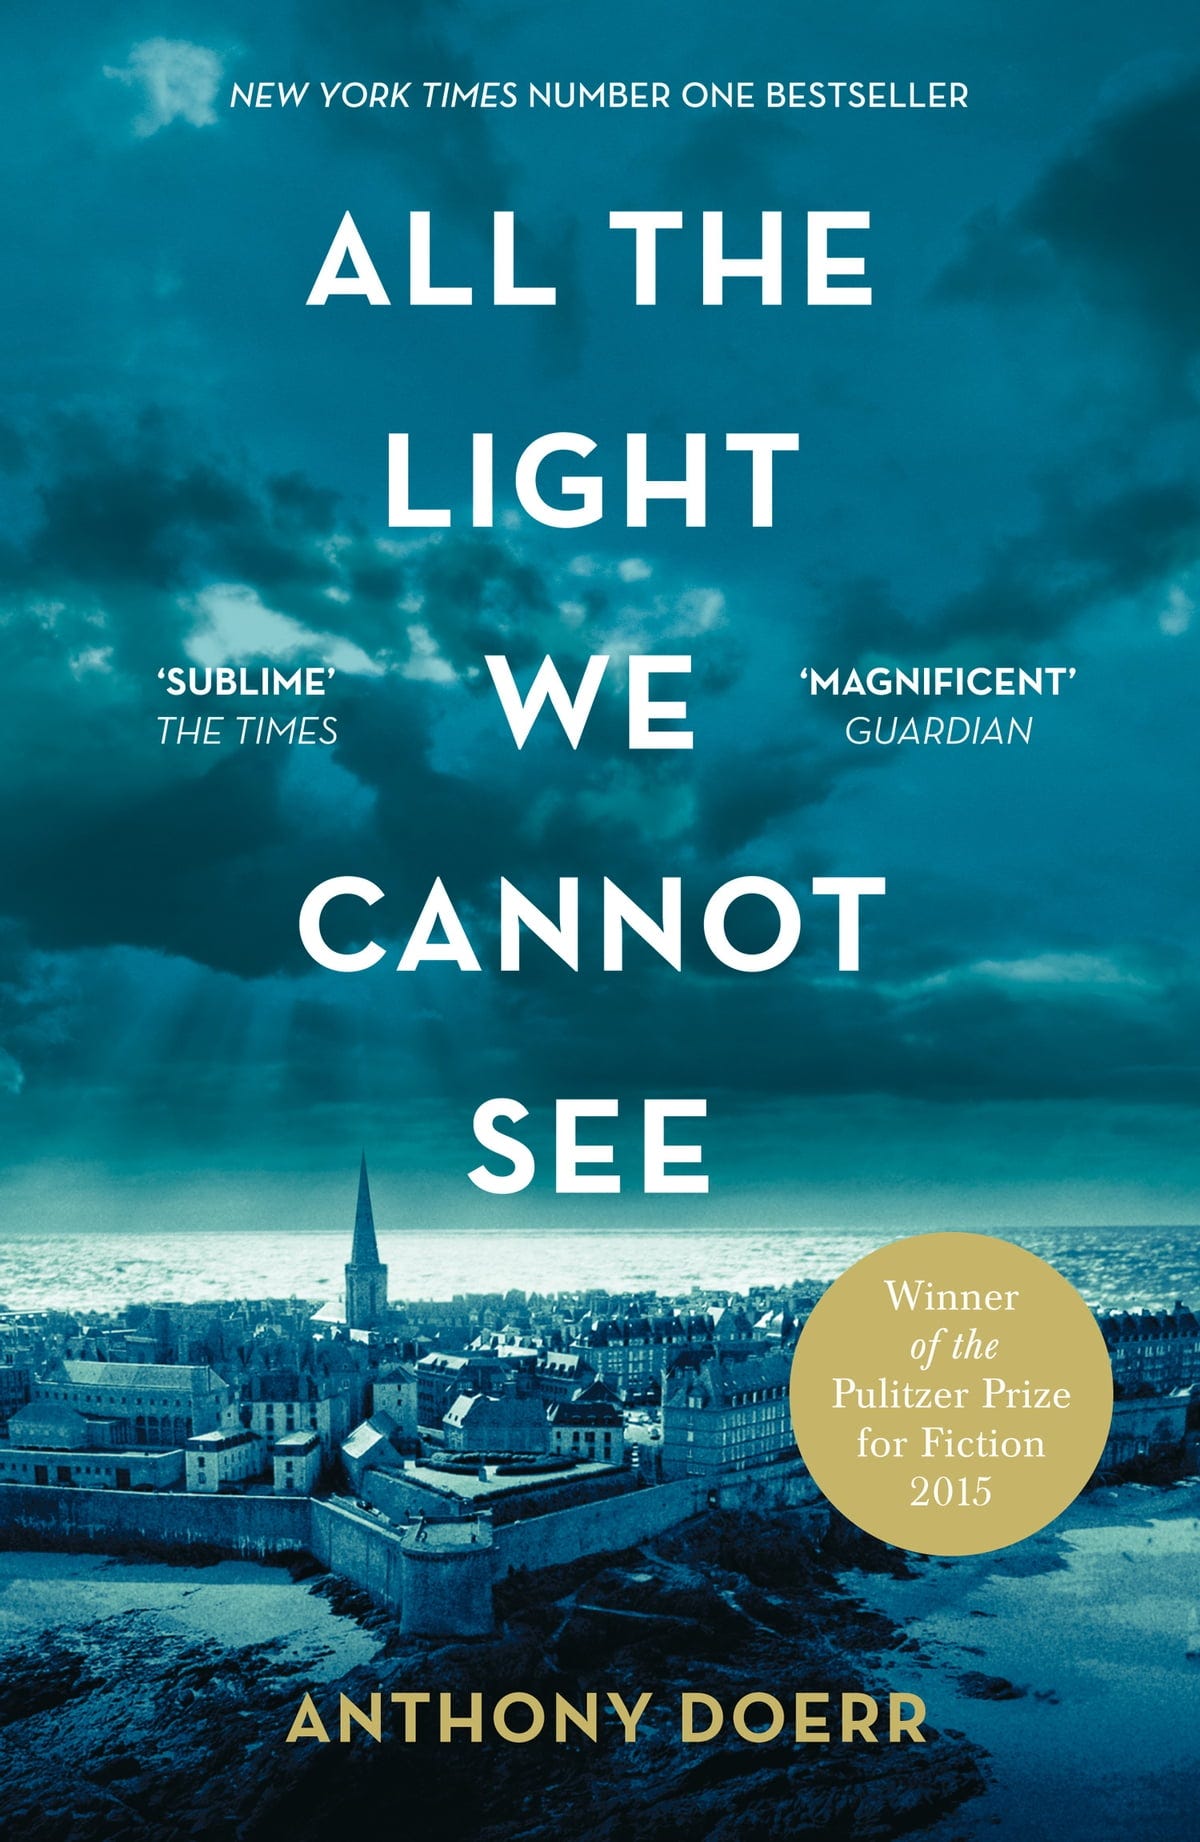 All the Light We Cannot See eBook by Anthony Doerr - 9780007548682 |  Rakuten Kobo Singapore